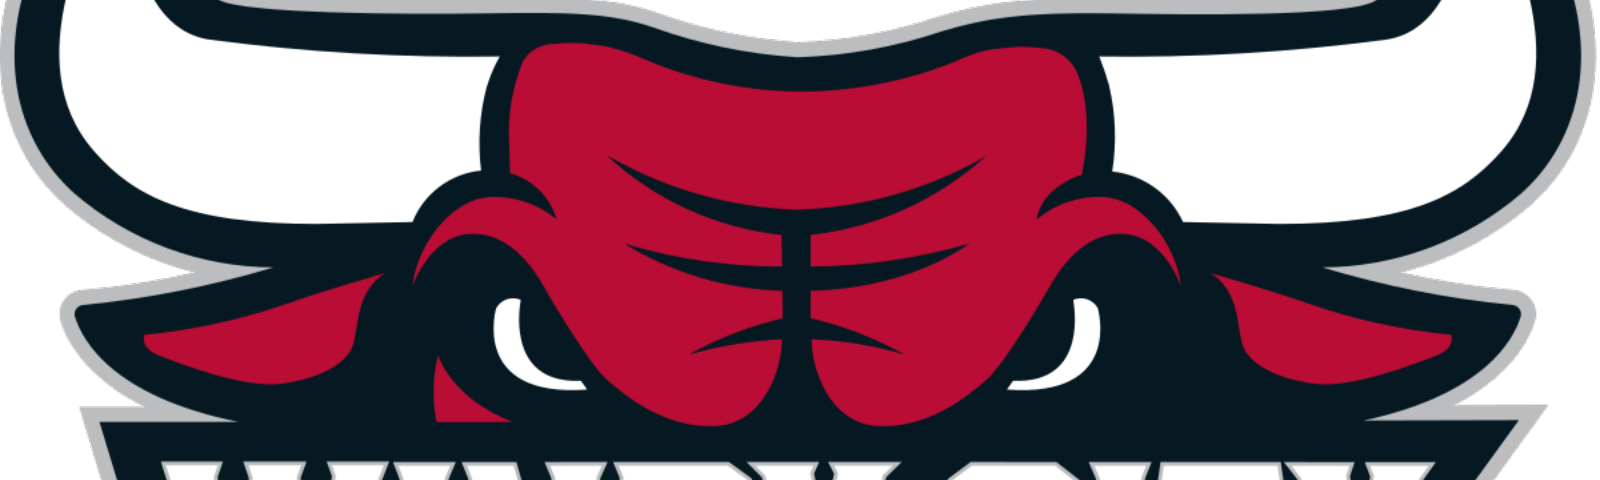 Are The Windy City Bulls For Real - Are The Windy City Bulls For Real (1600x480)